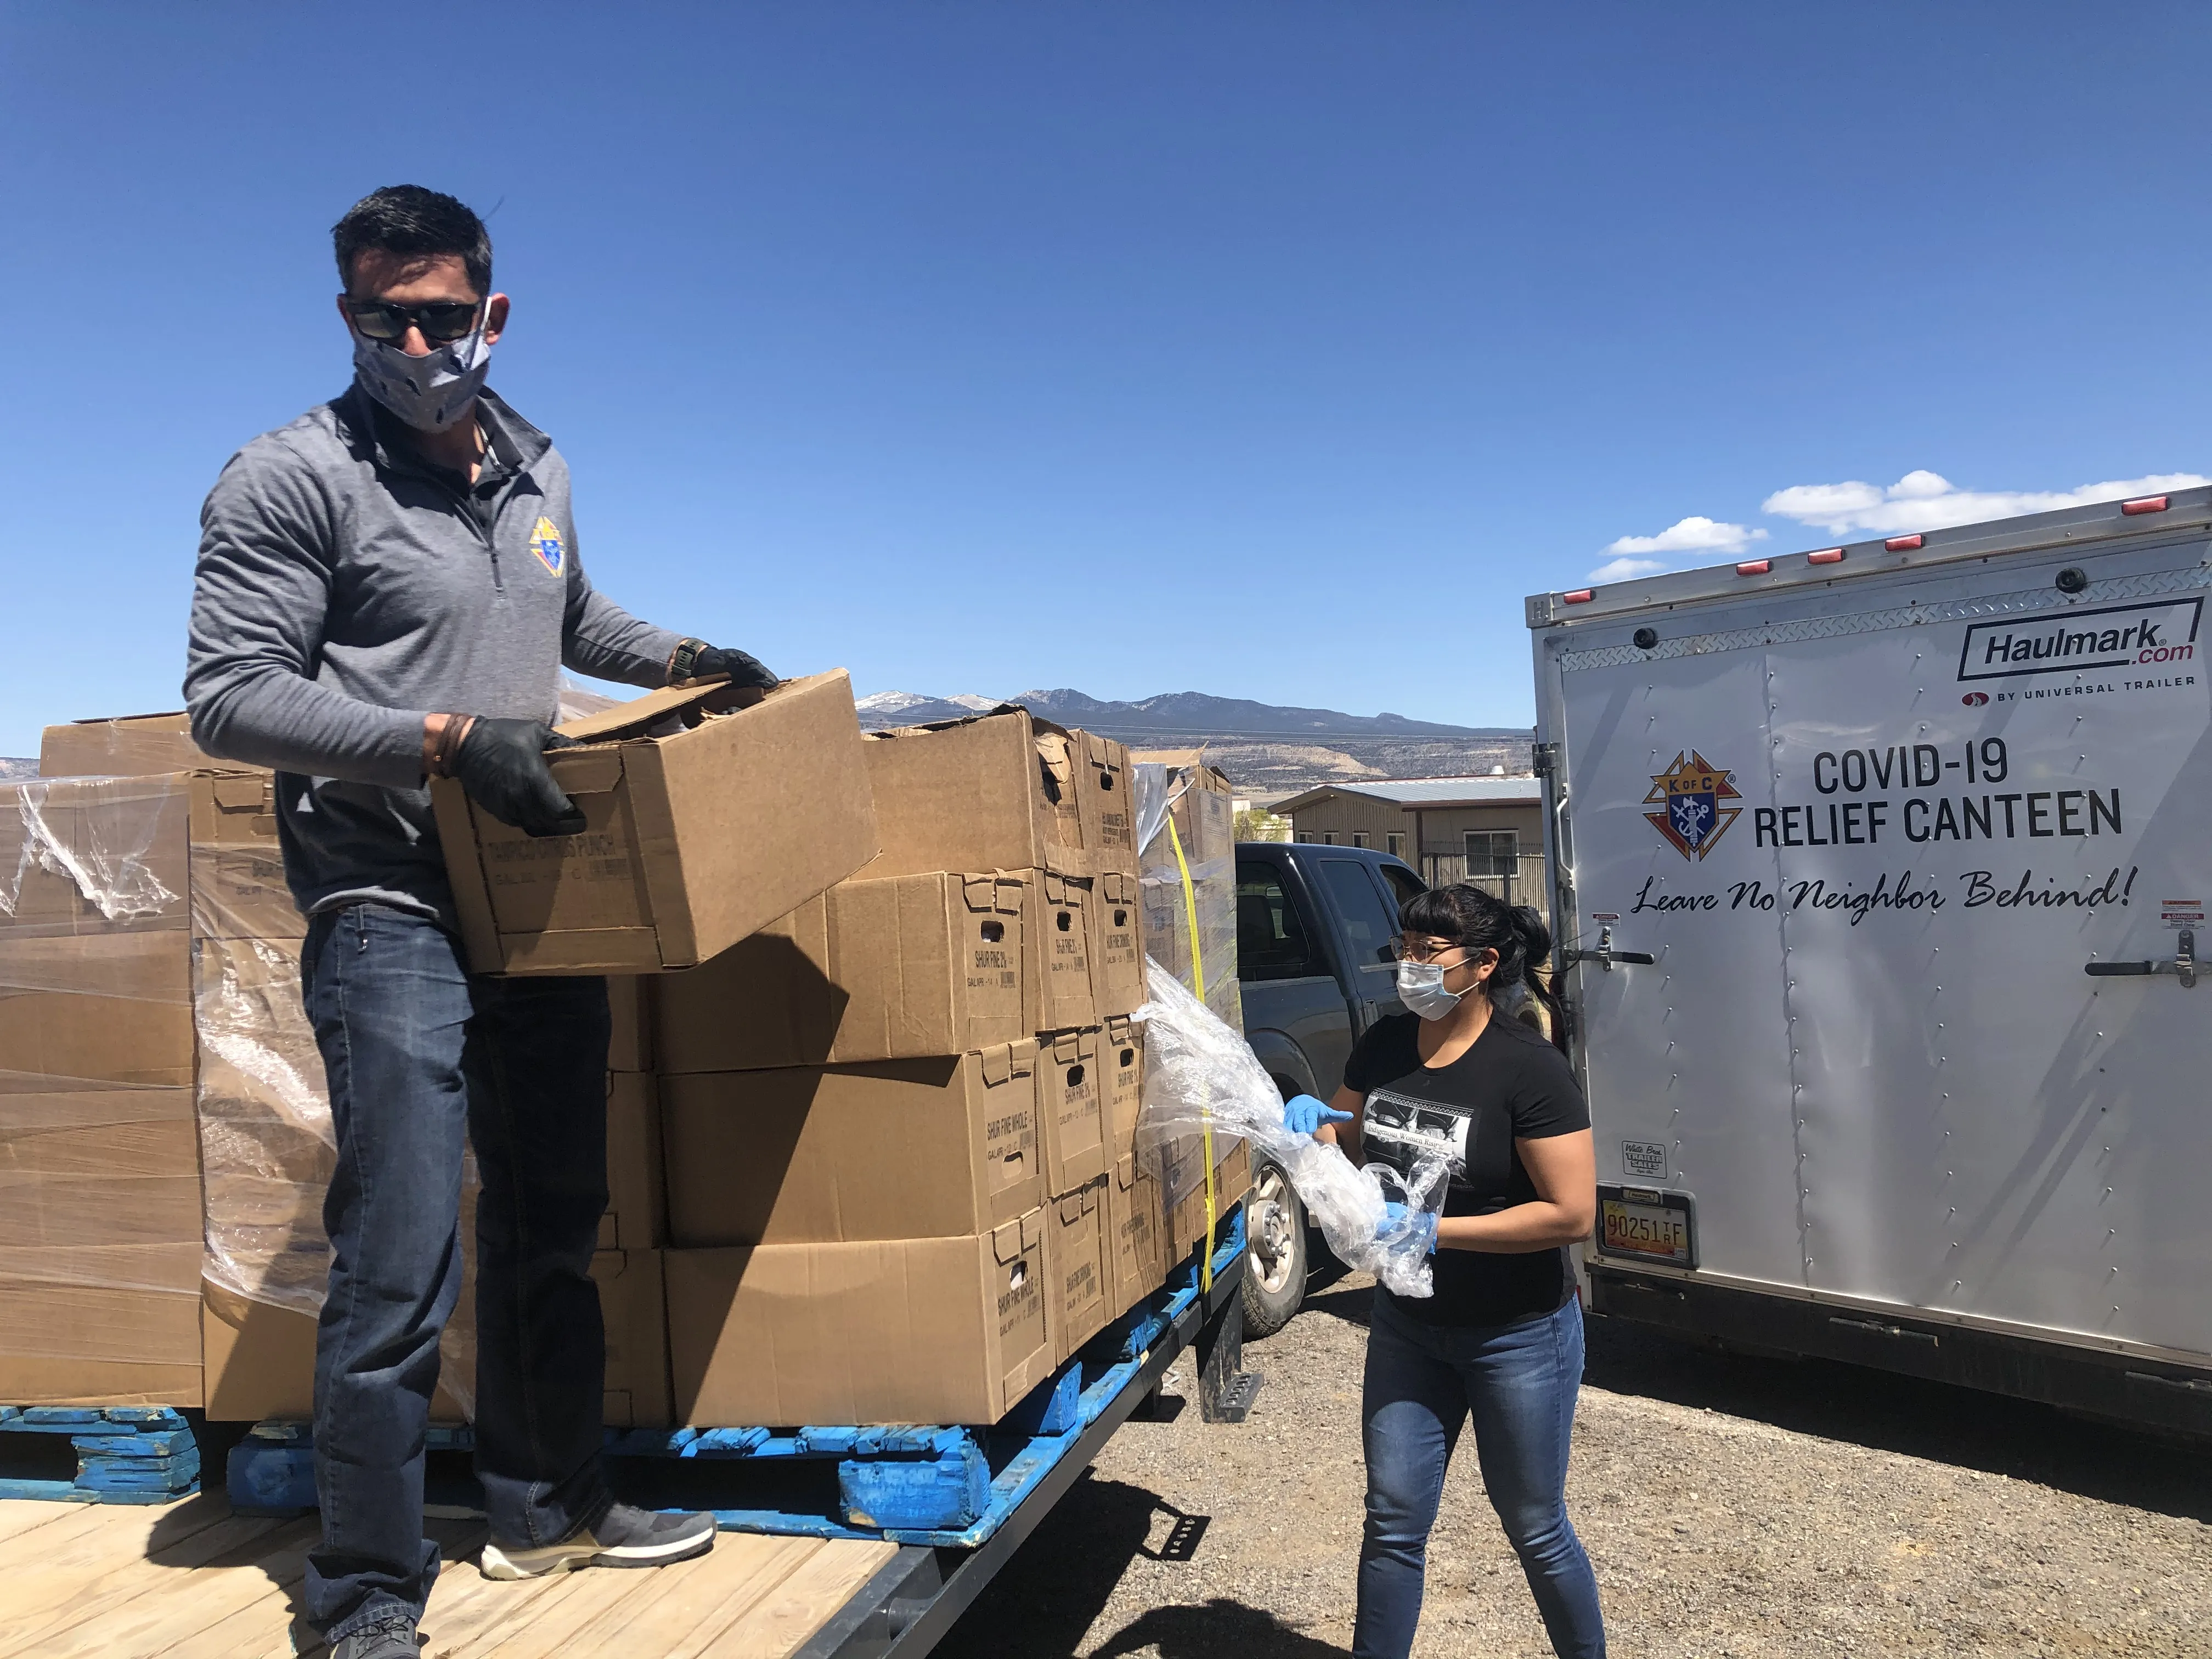 Volunteers deliver food baskets to New Mexico's Acoma pueblo from the "Knights of Columbus Covid-19 Relief Canteen", April 2020. ?w=200&h=150